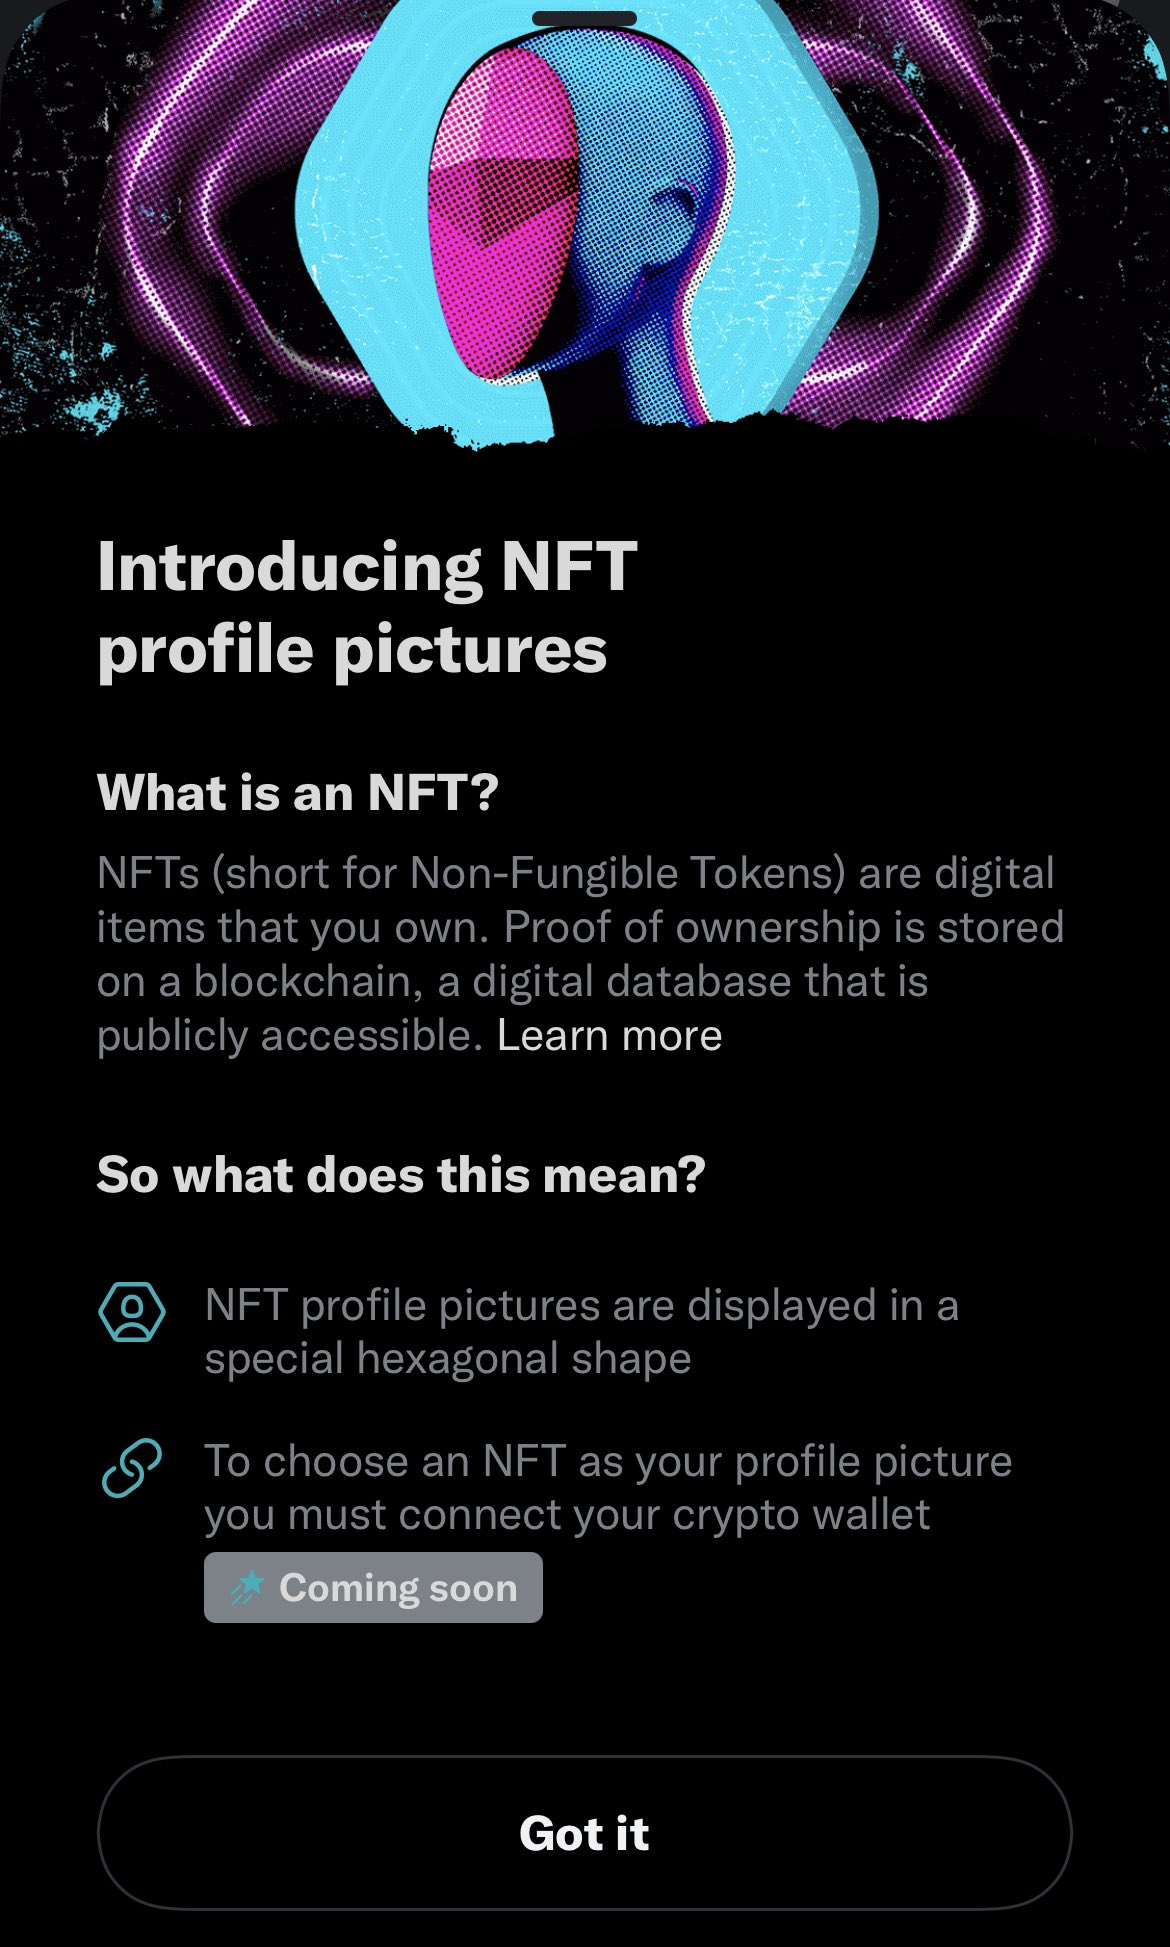 Tom Warren on Twitter: &quot;Twitter has just launched NFT profile photos. They&#39;re hexagon-shaped https://t.co/7sotIVLHSn https://t.co/fhnWijgVyi&quot; / Twitter